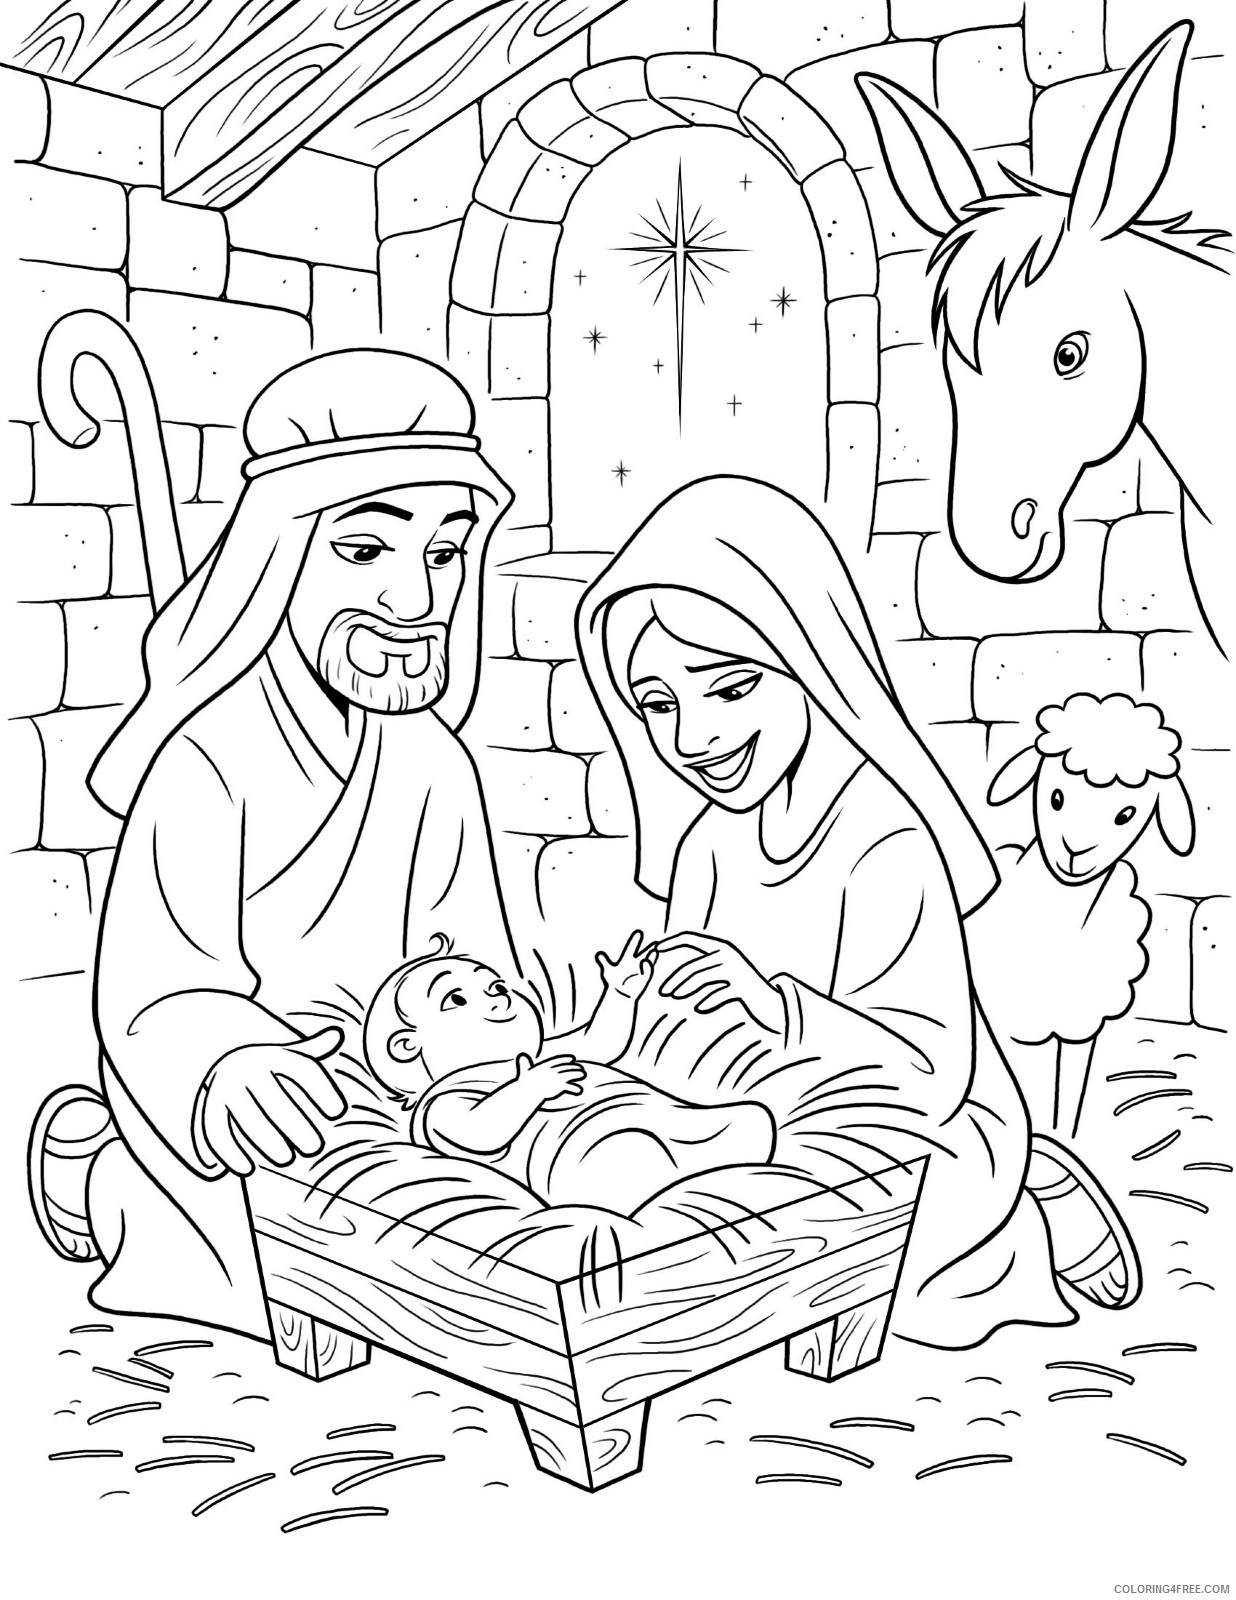 free-nativity-coloring-pages-for-kids-coloring4free-coloring4free